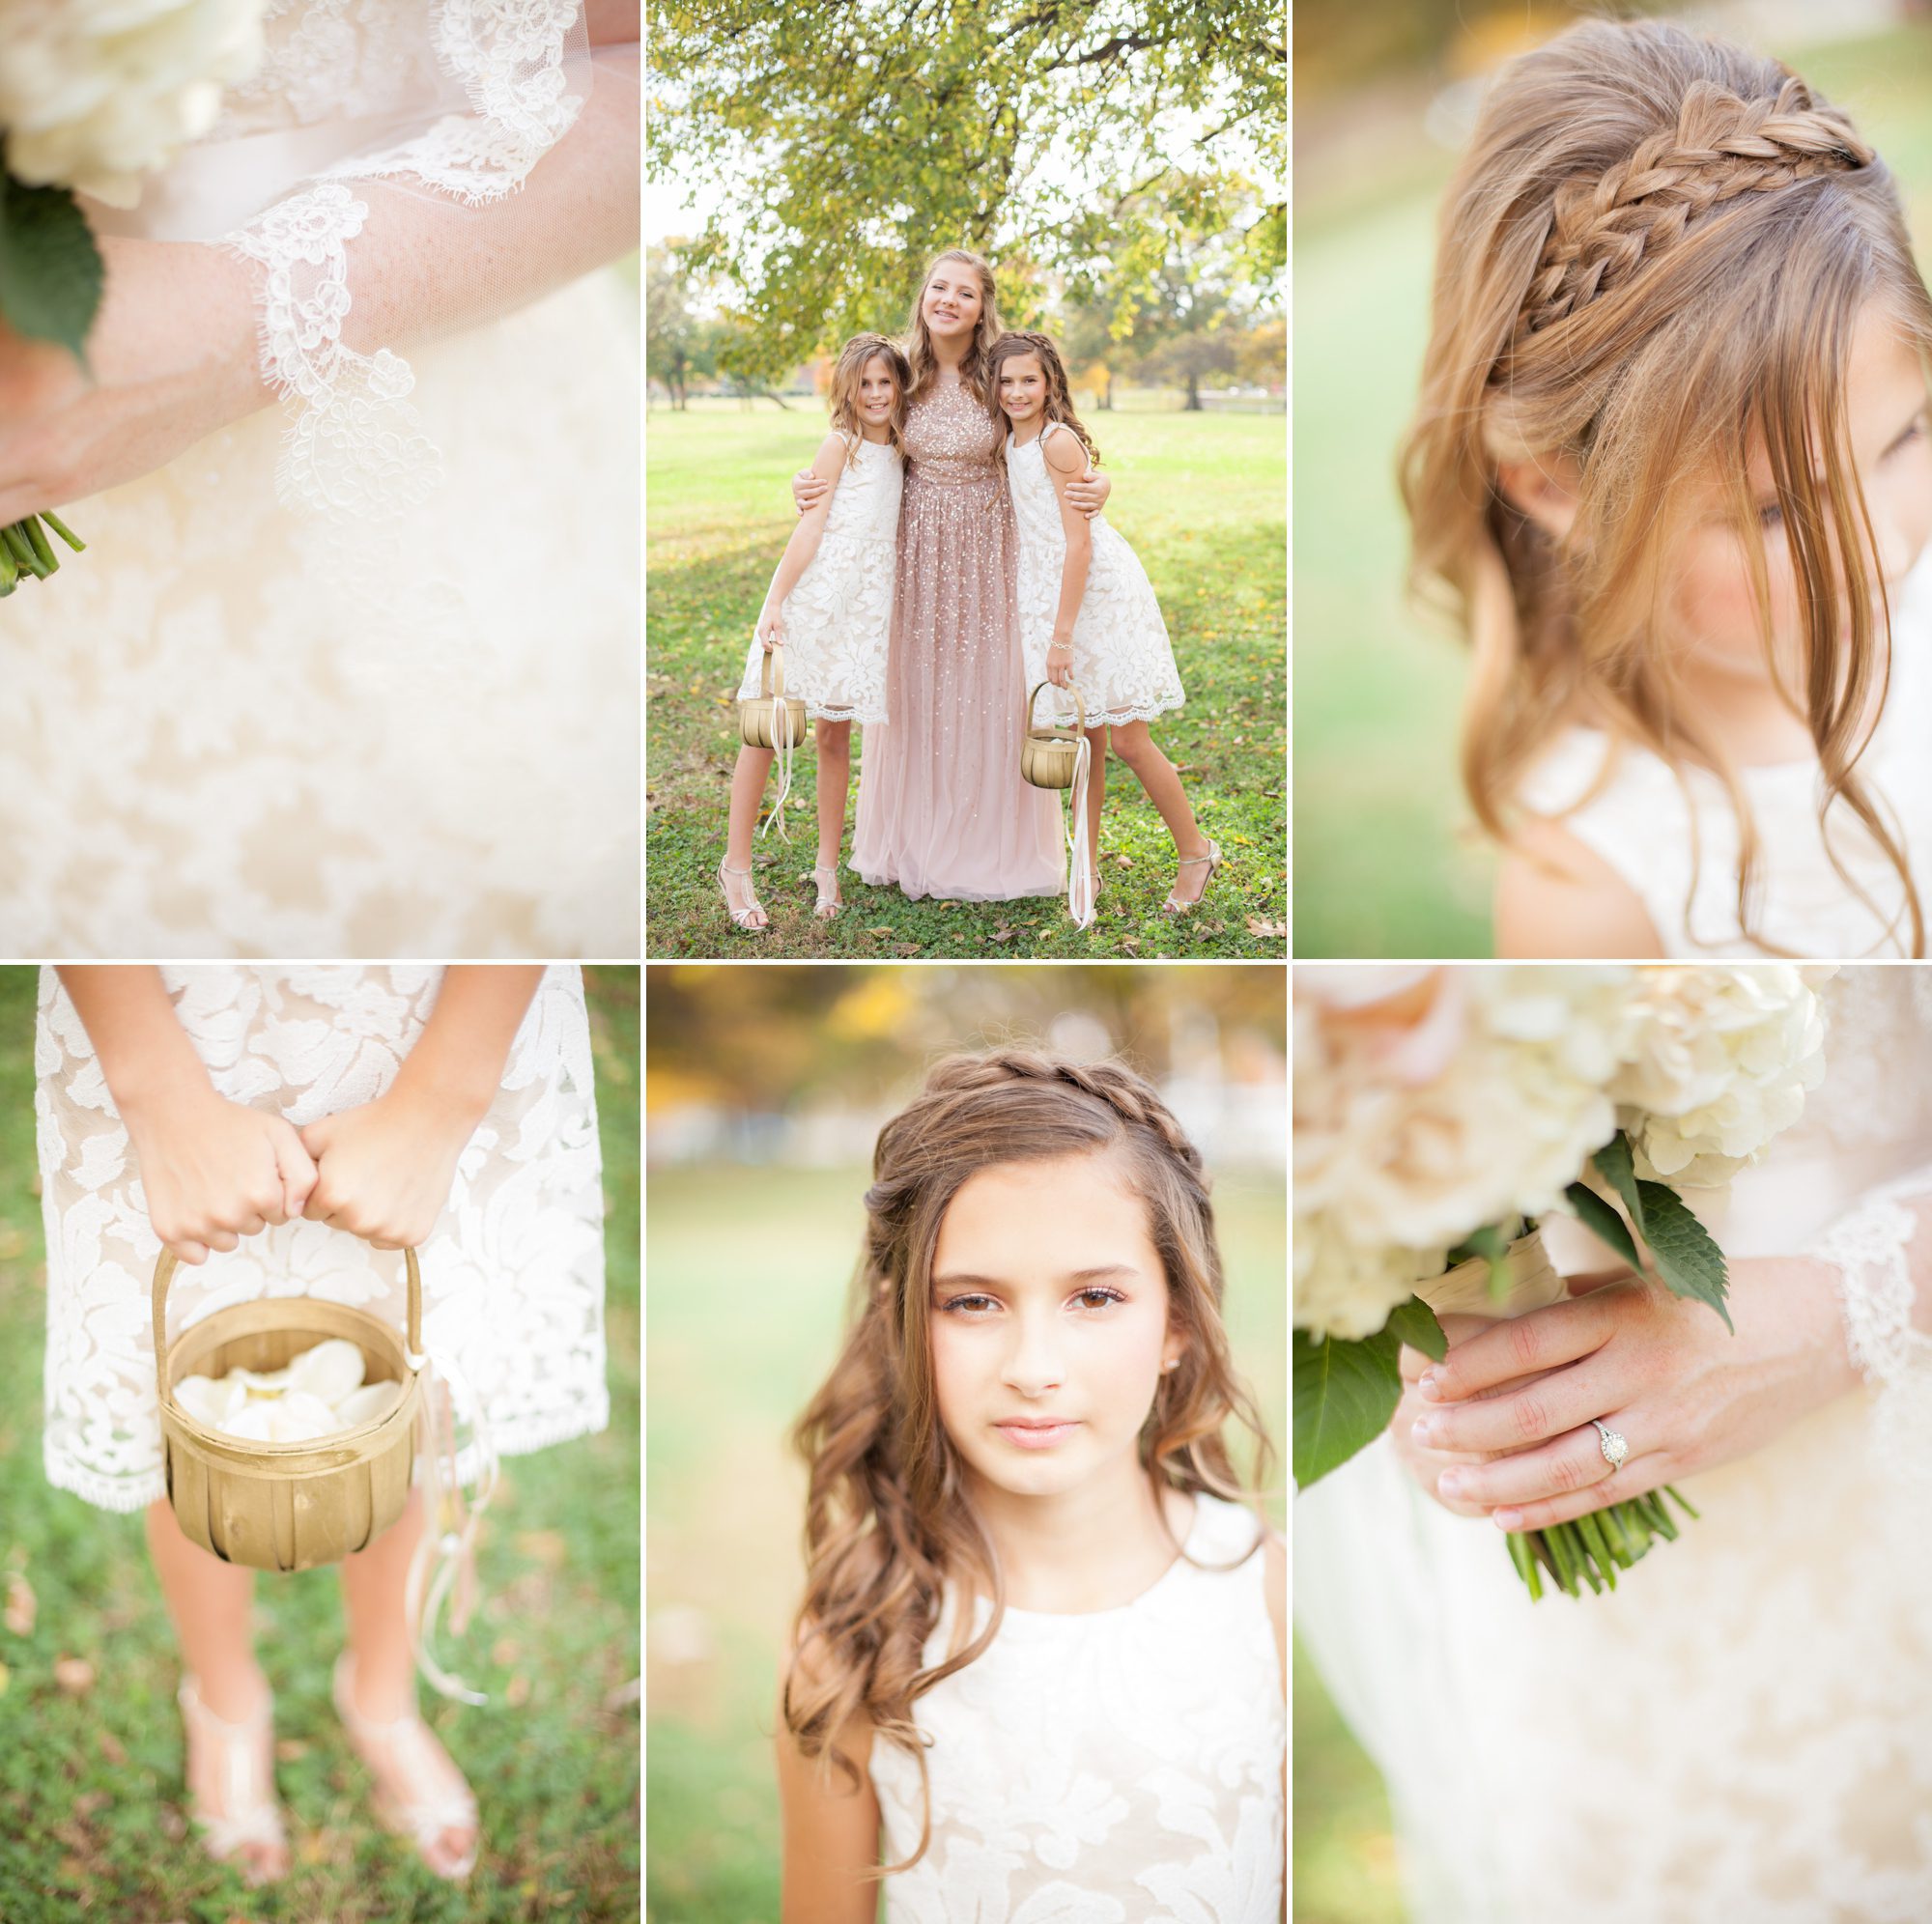 Flower girls and bride details wedding venue at Ruby, Nashville TN. Wedding photography by Krista Lee, Krista Lee Photography Franklin TN